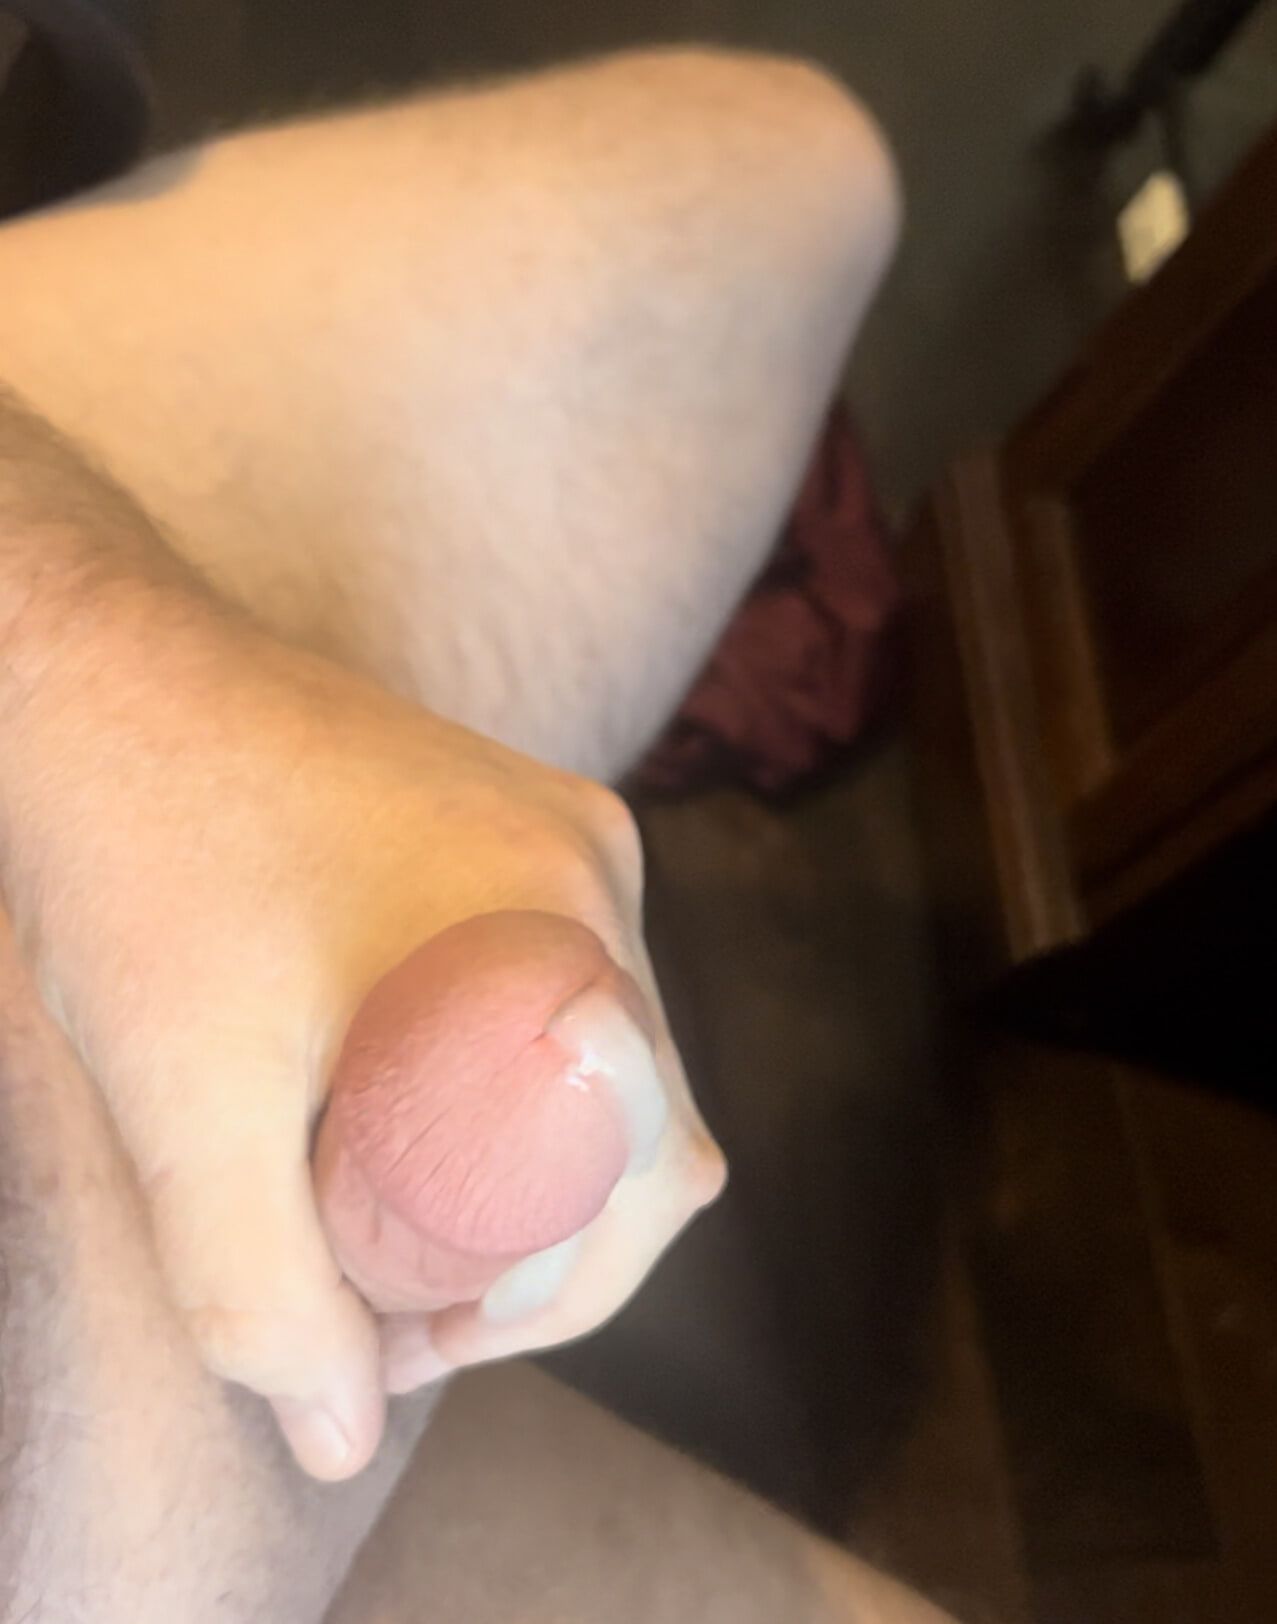 More fun while working. rock hard and getting read to cum